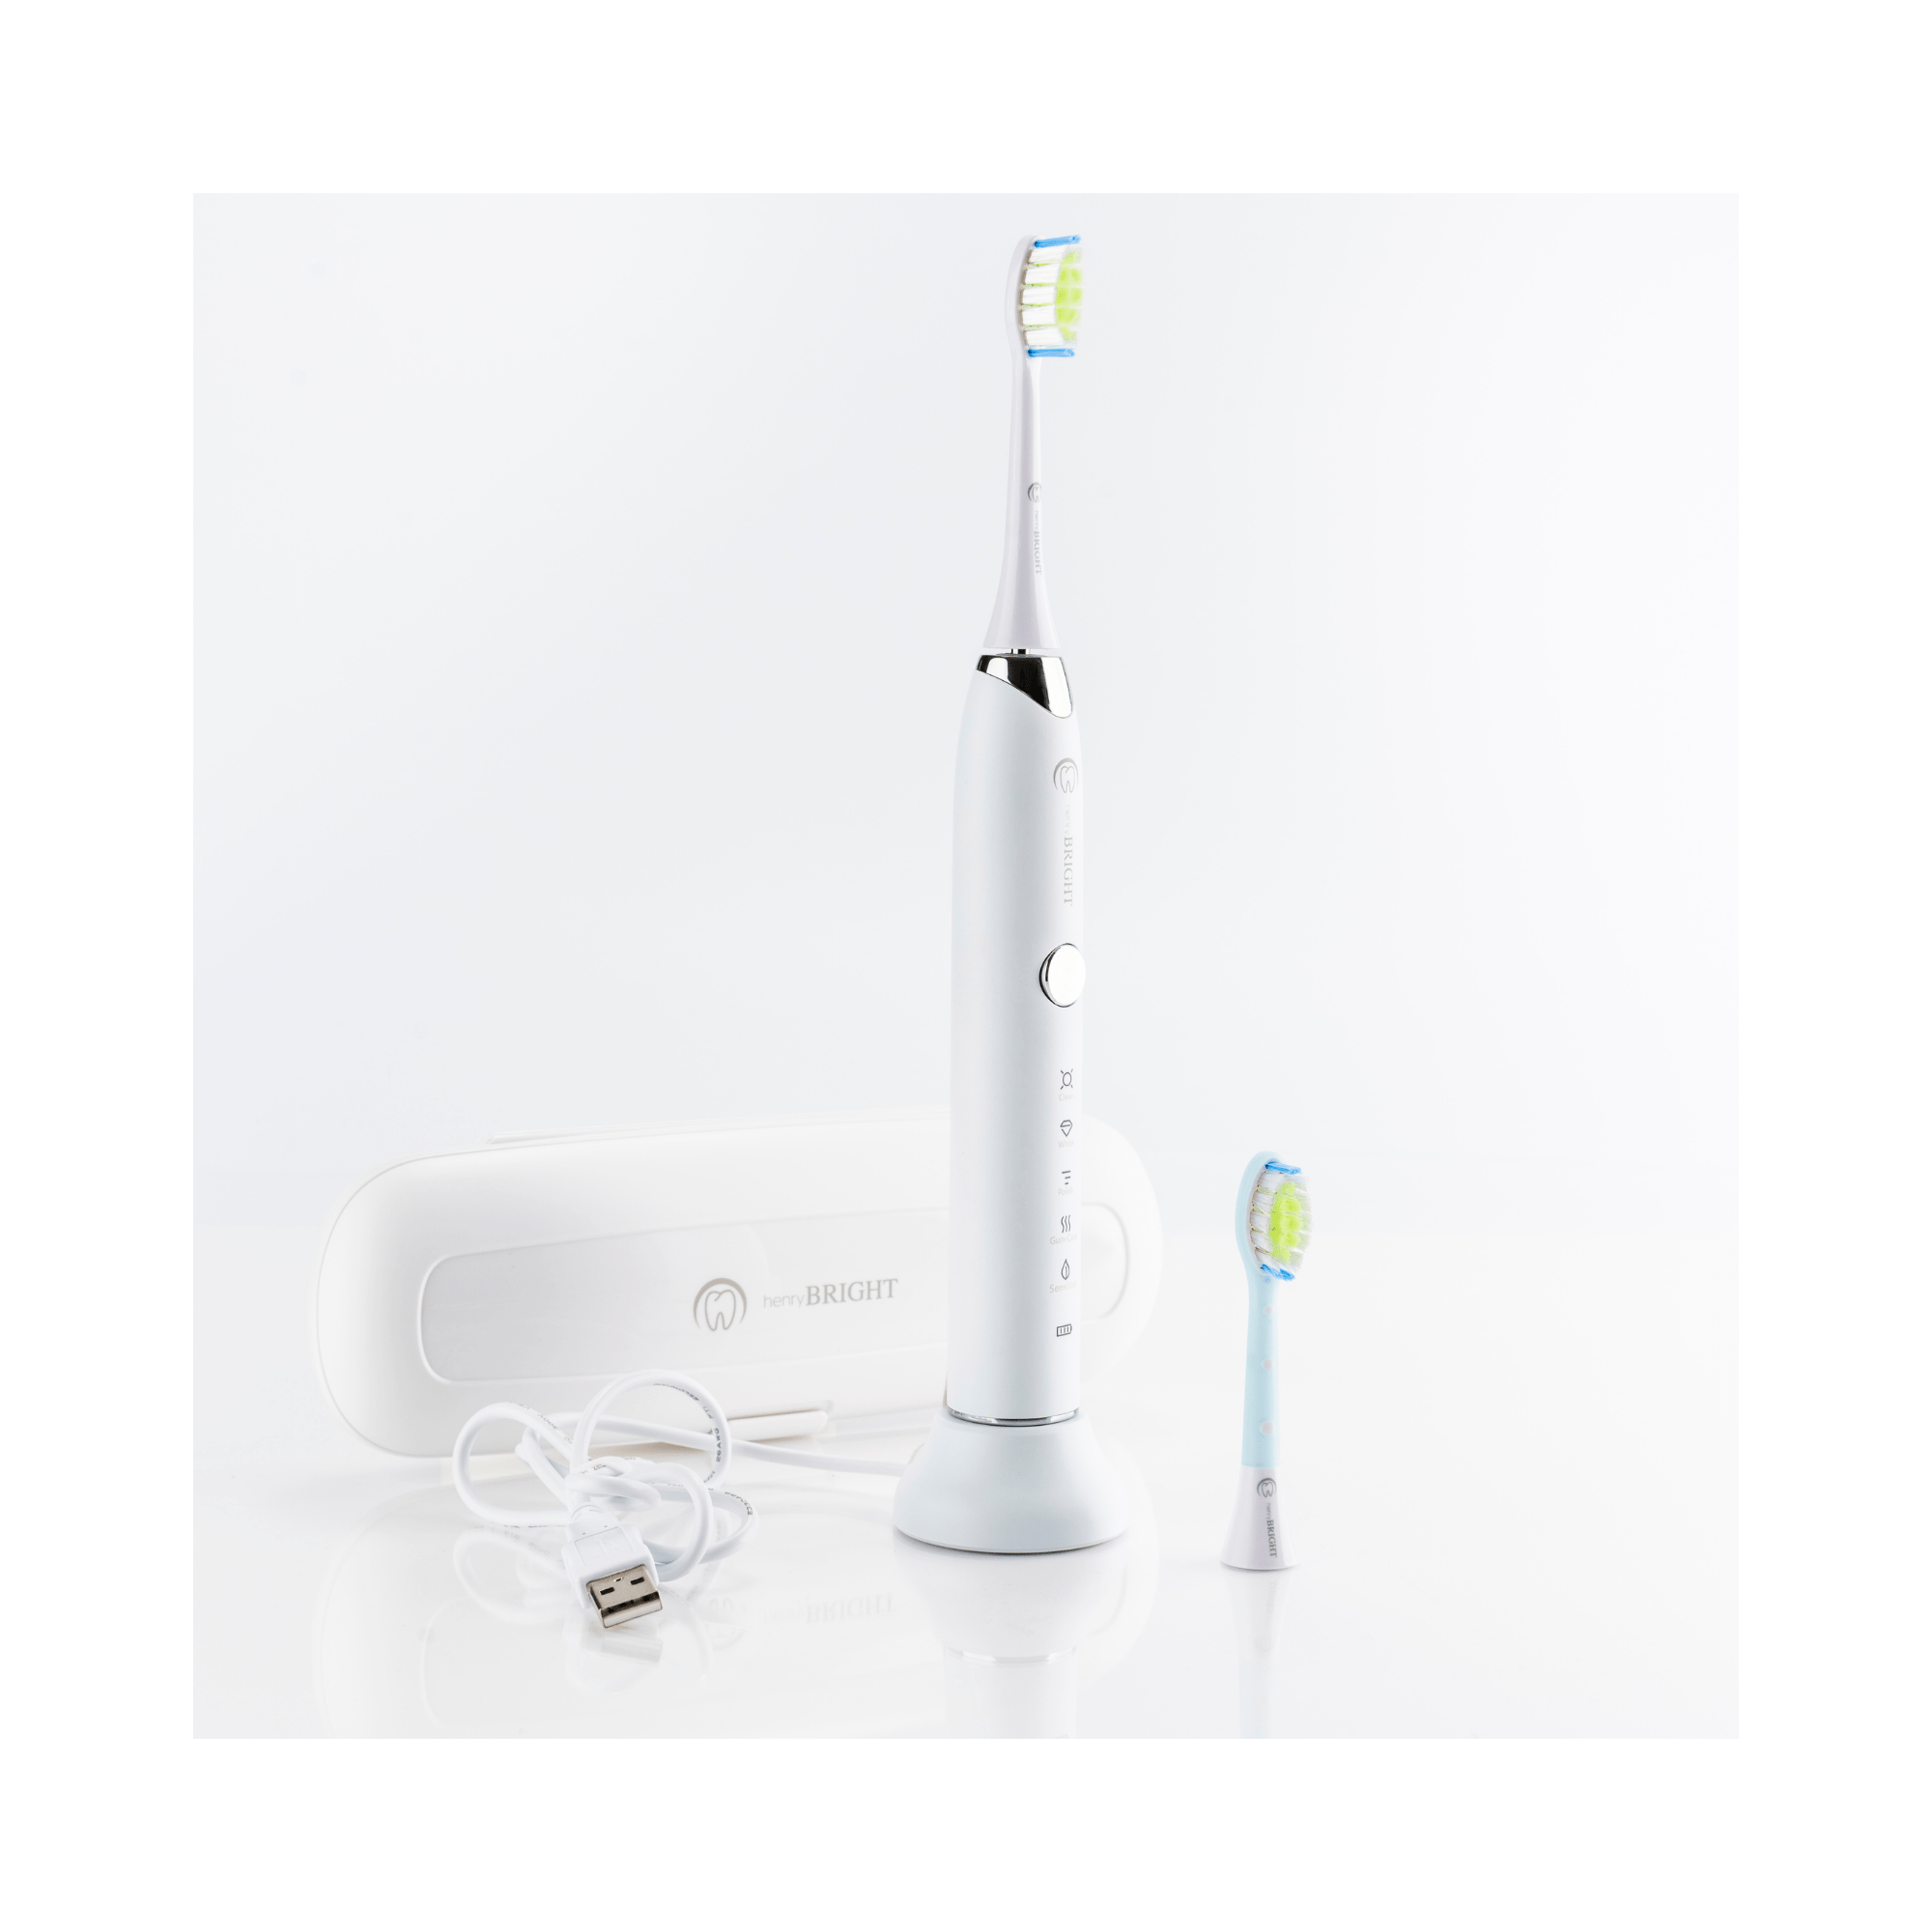 Cortex Beauty Henry Bright 5 Mode USB Electric Toothbrush